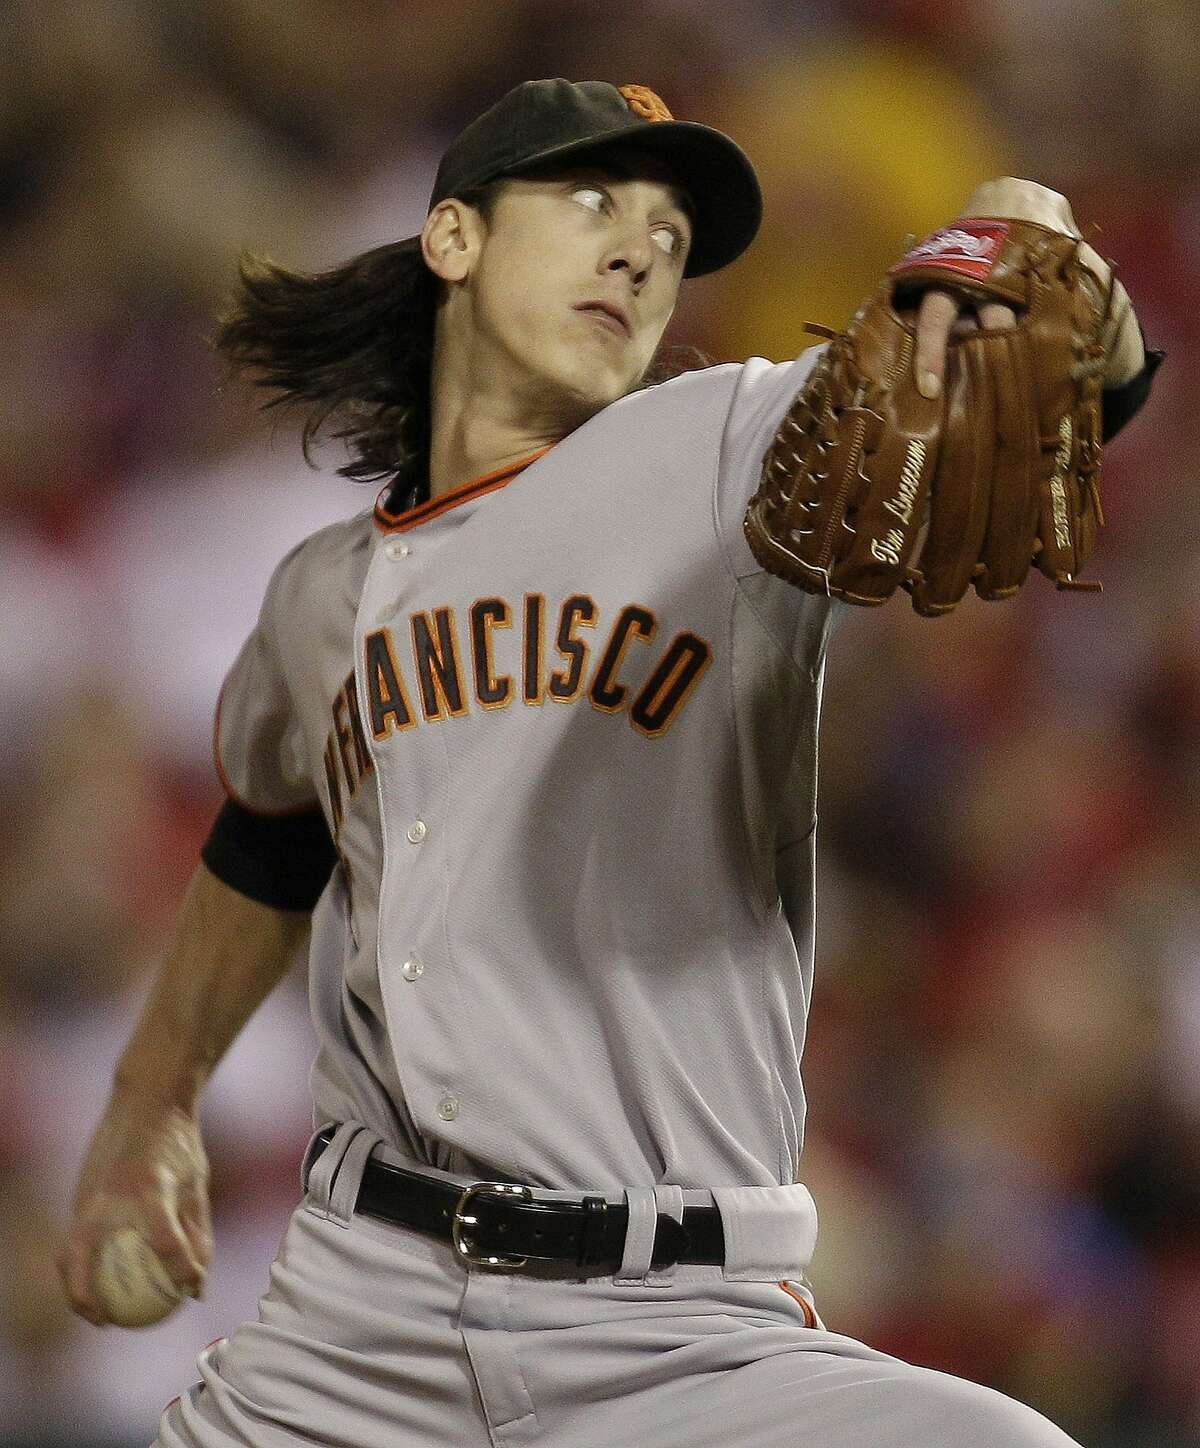 Tim Lincecum portrayed as totally baked in poster found in China